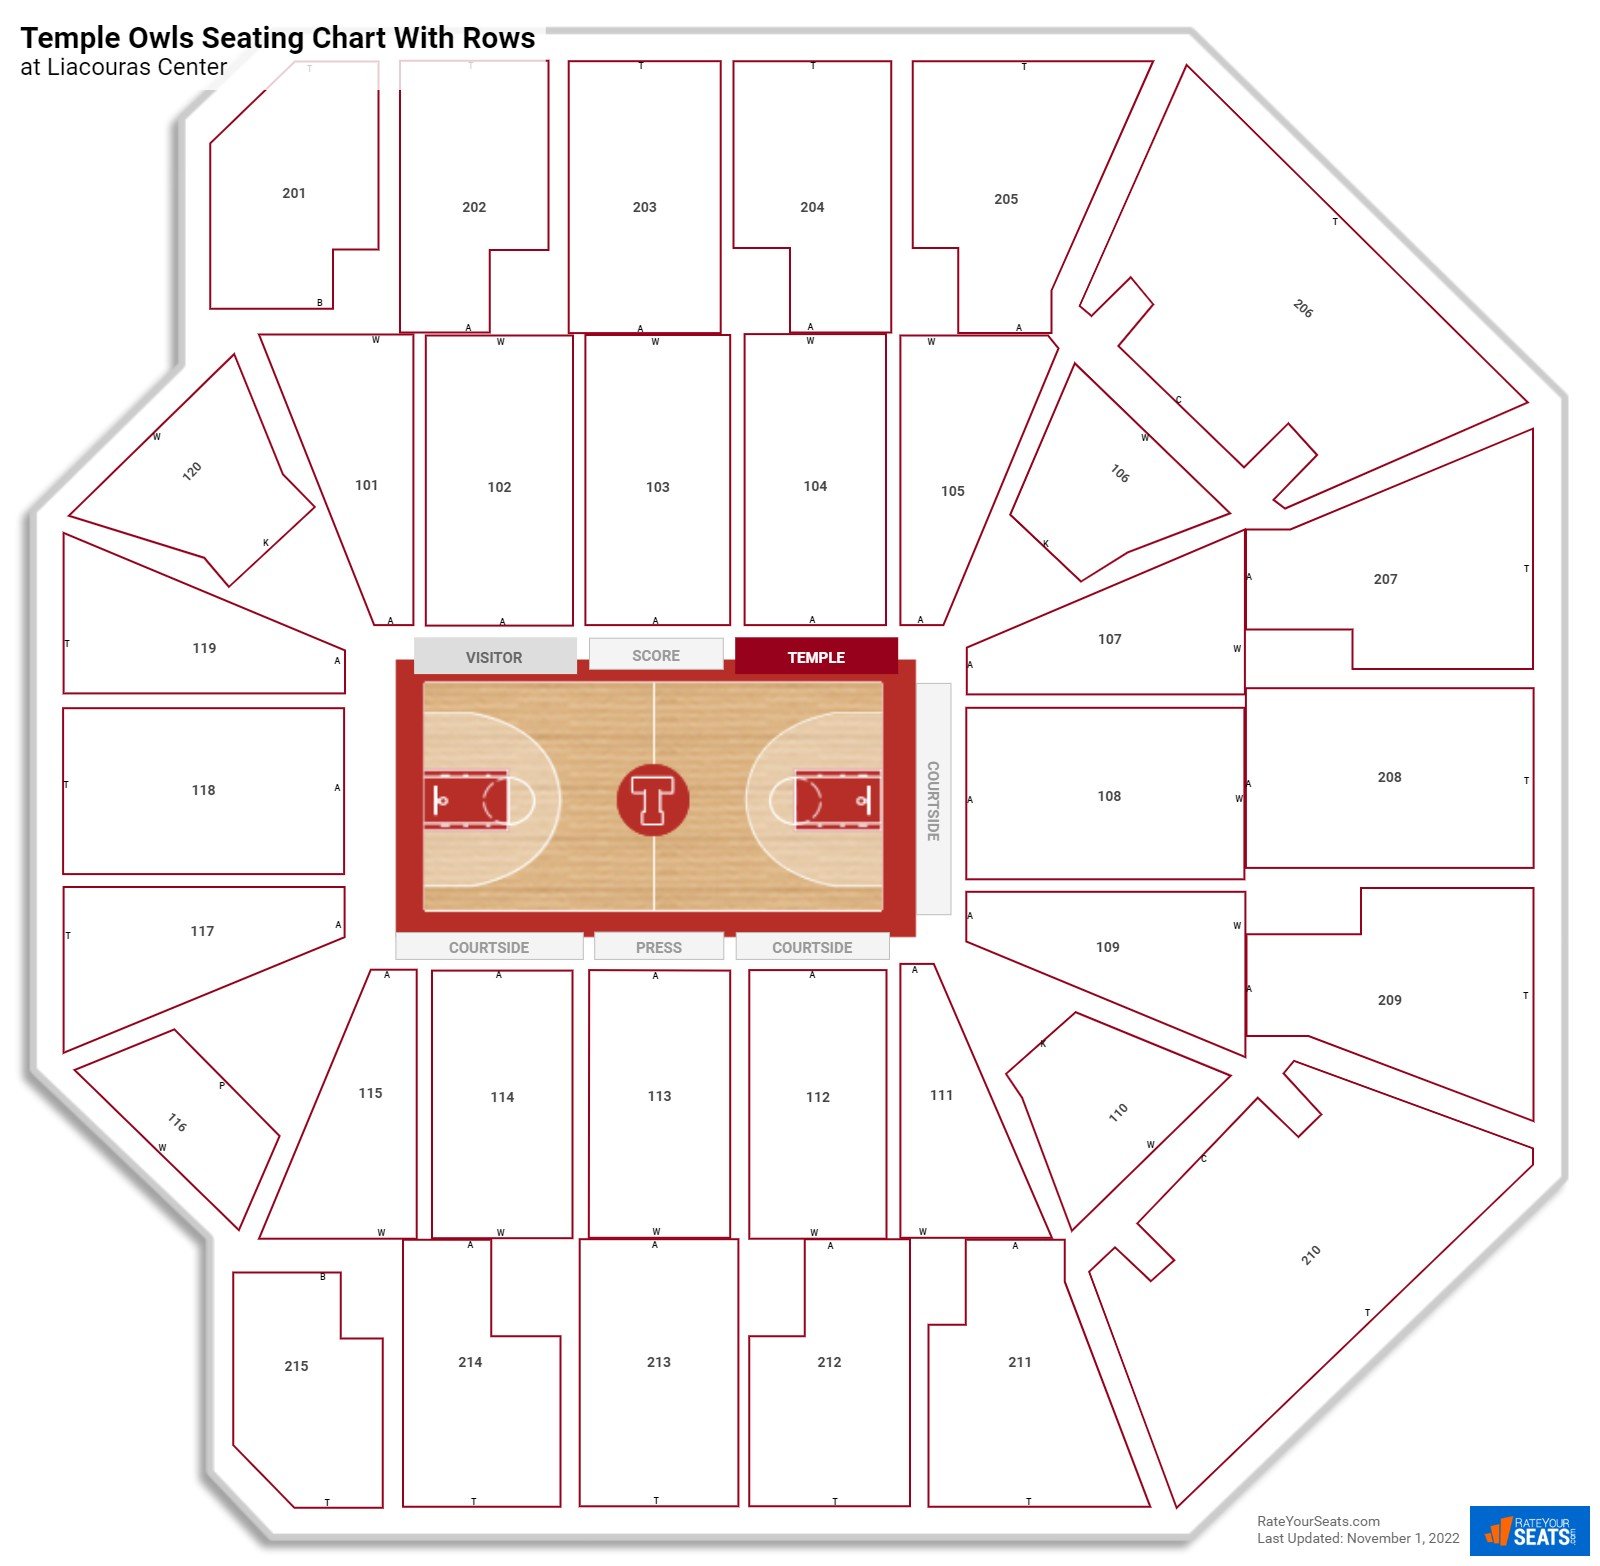 Liacouras Center seating chart with row numbers